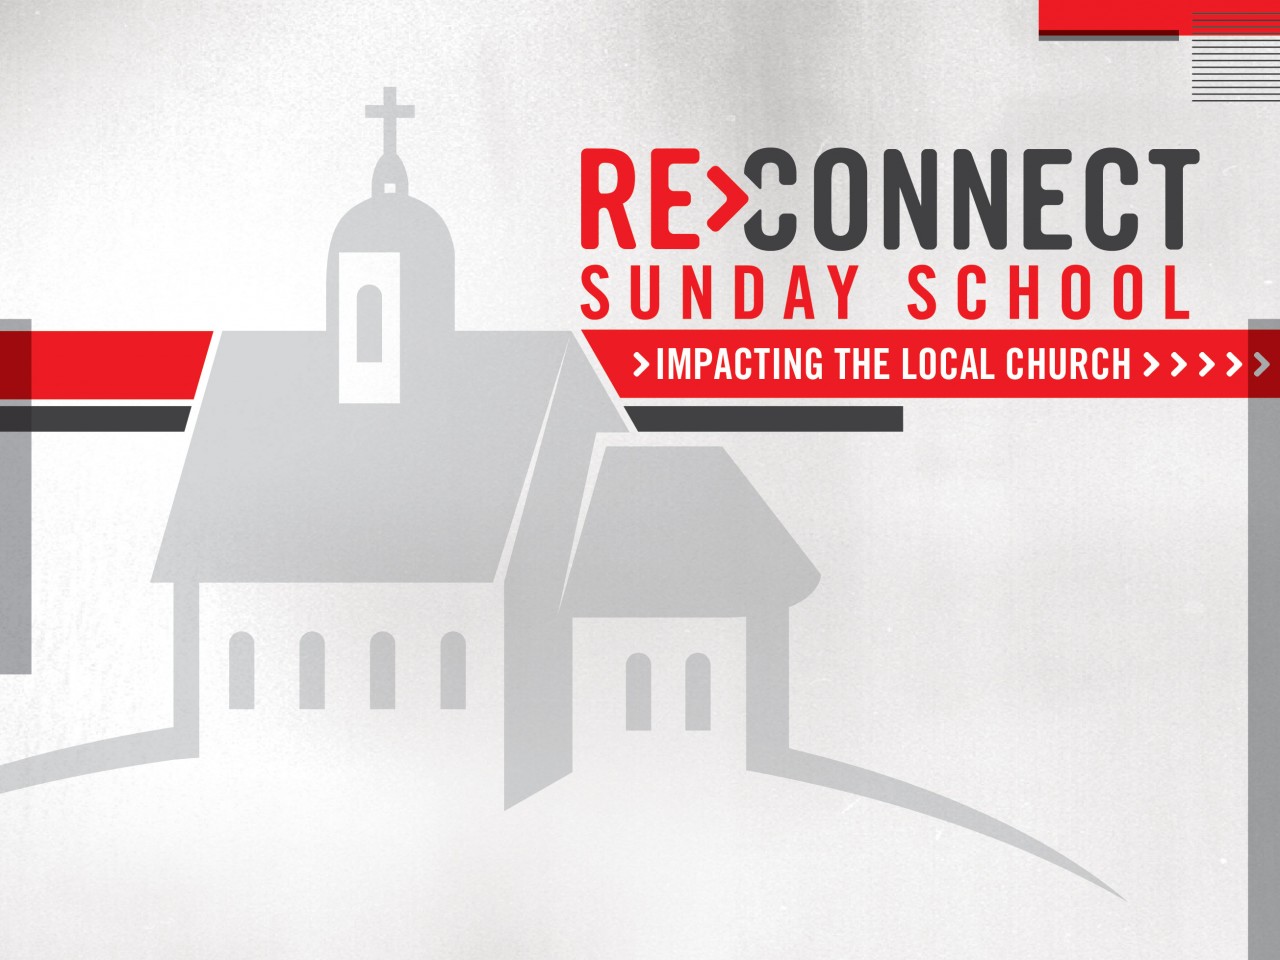 ReConnect impacting the local church